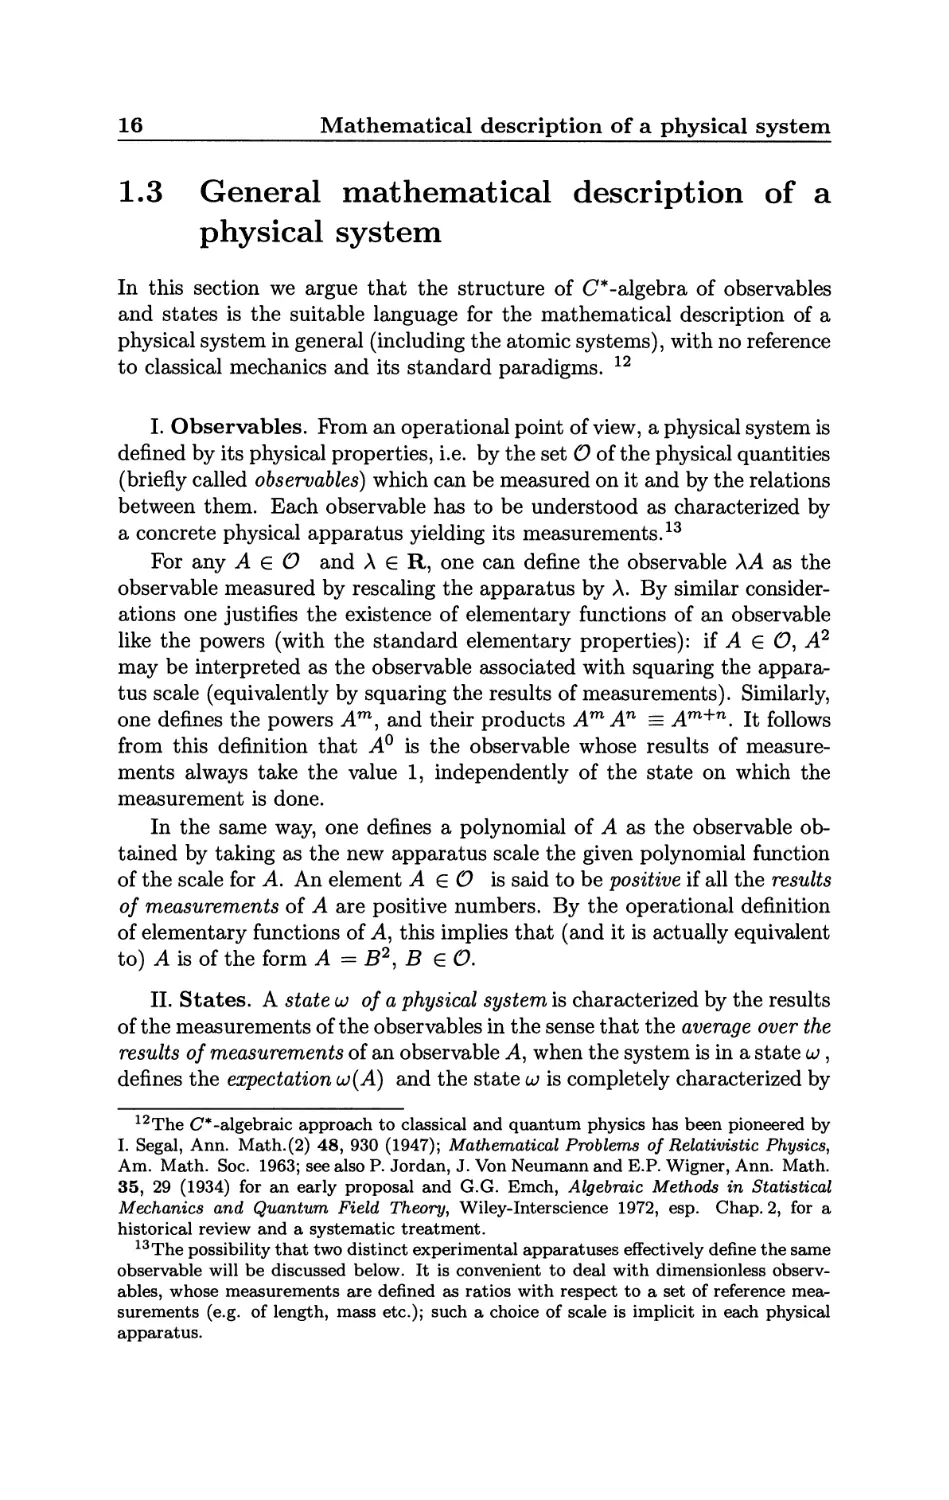 1.3 General mathematical description of a physical system